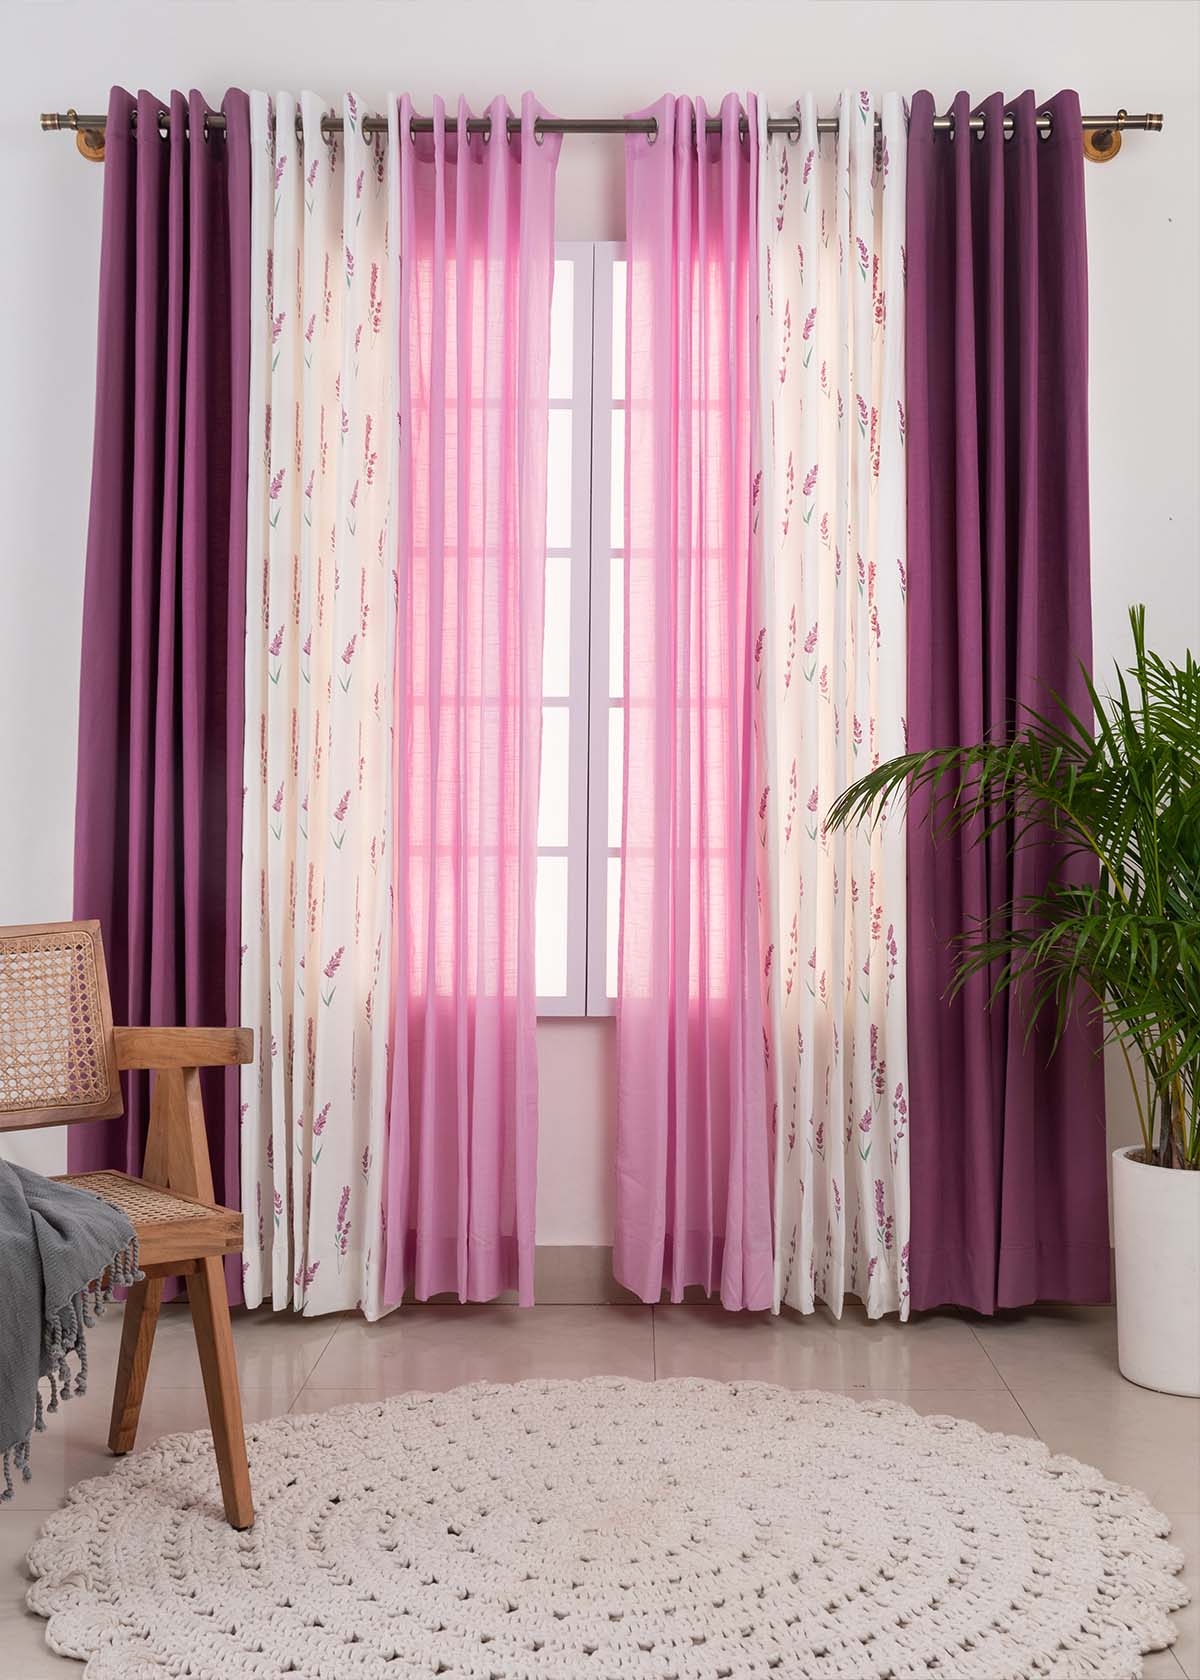 Grape Solid, Fields Of Lavender, Dusty Lavender Sheer Set of 6 Combo Cotton Curtain - Grape Lavender